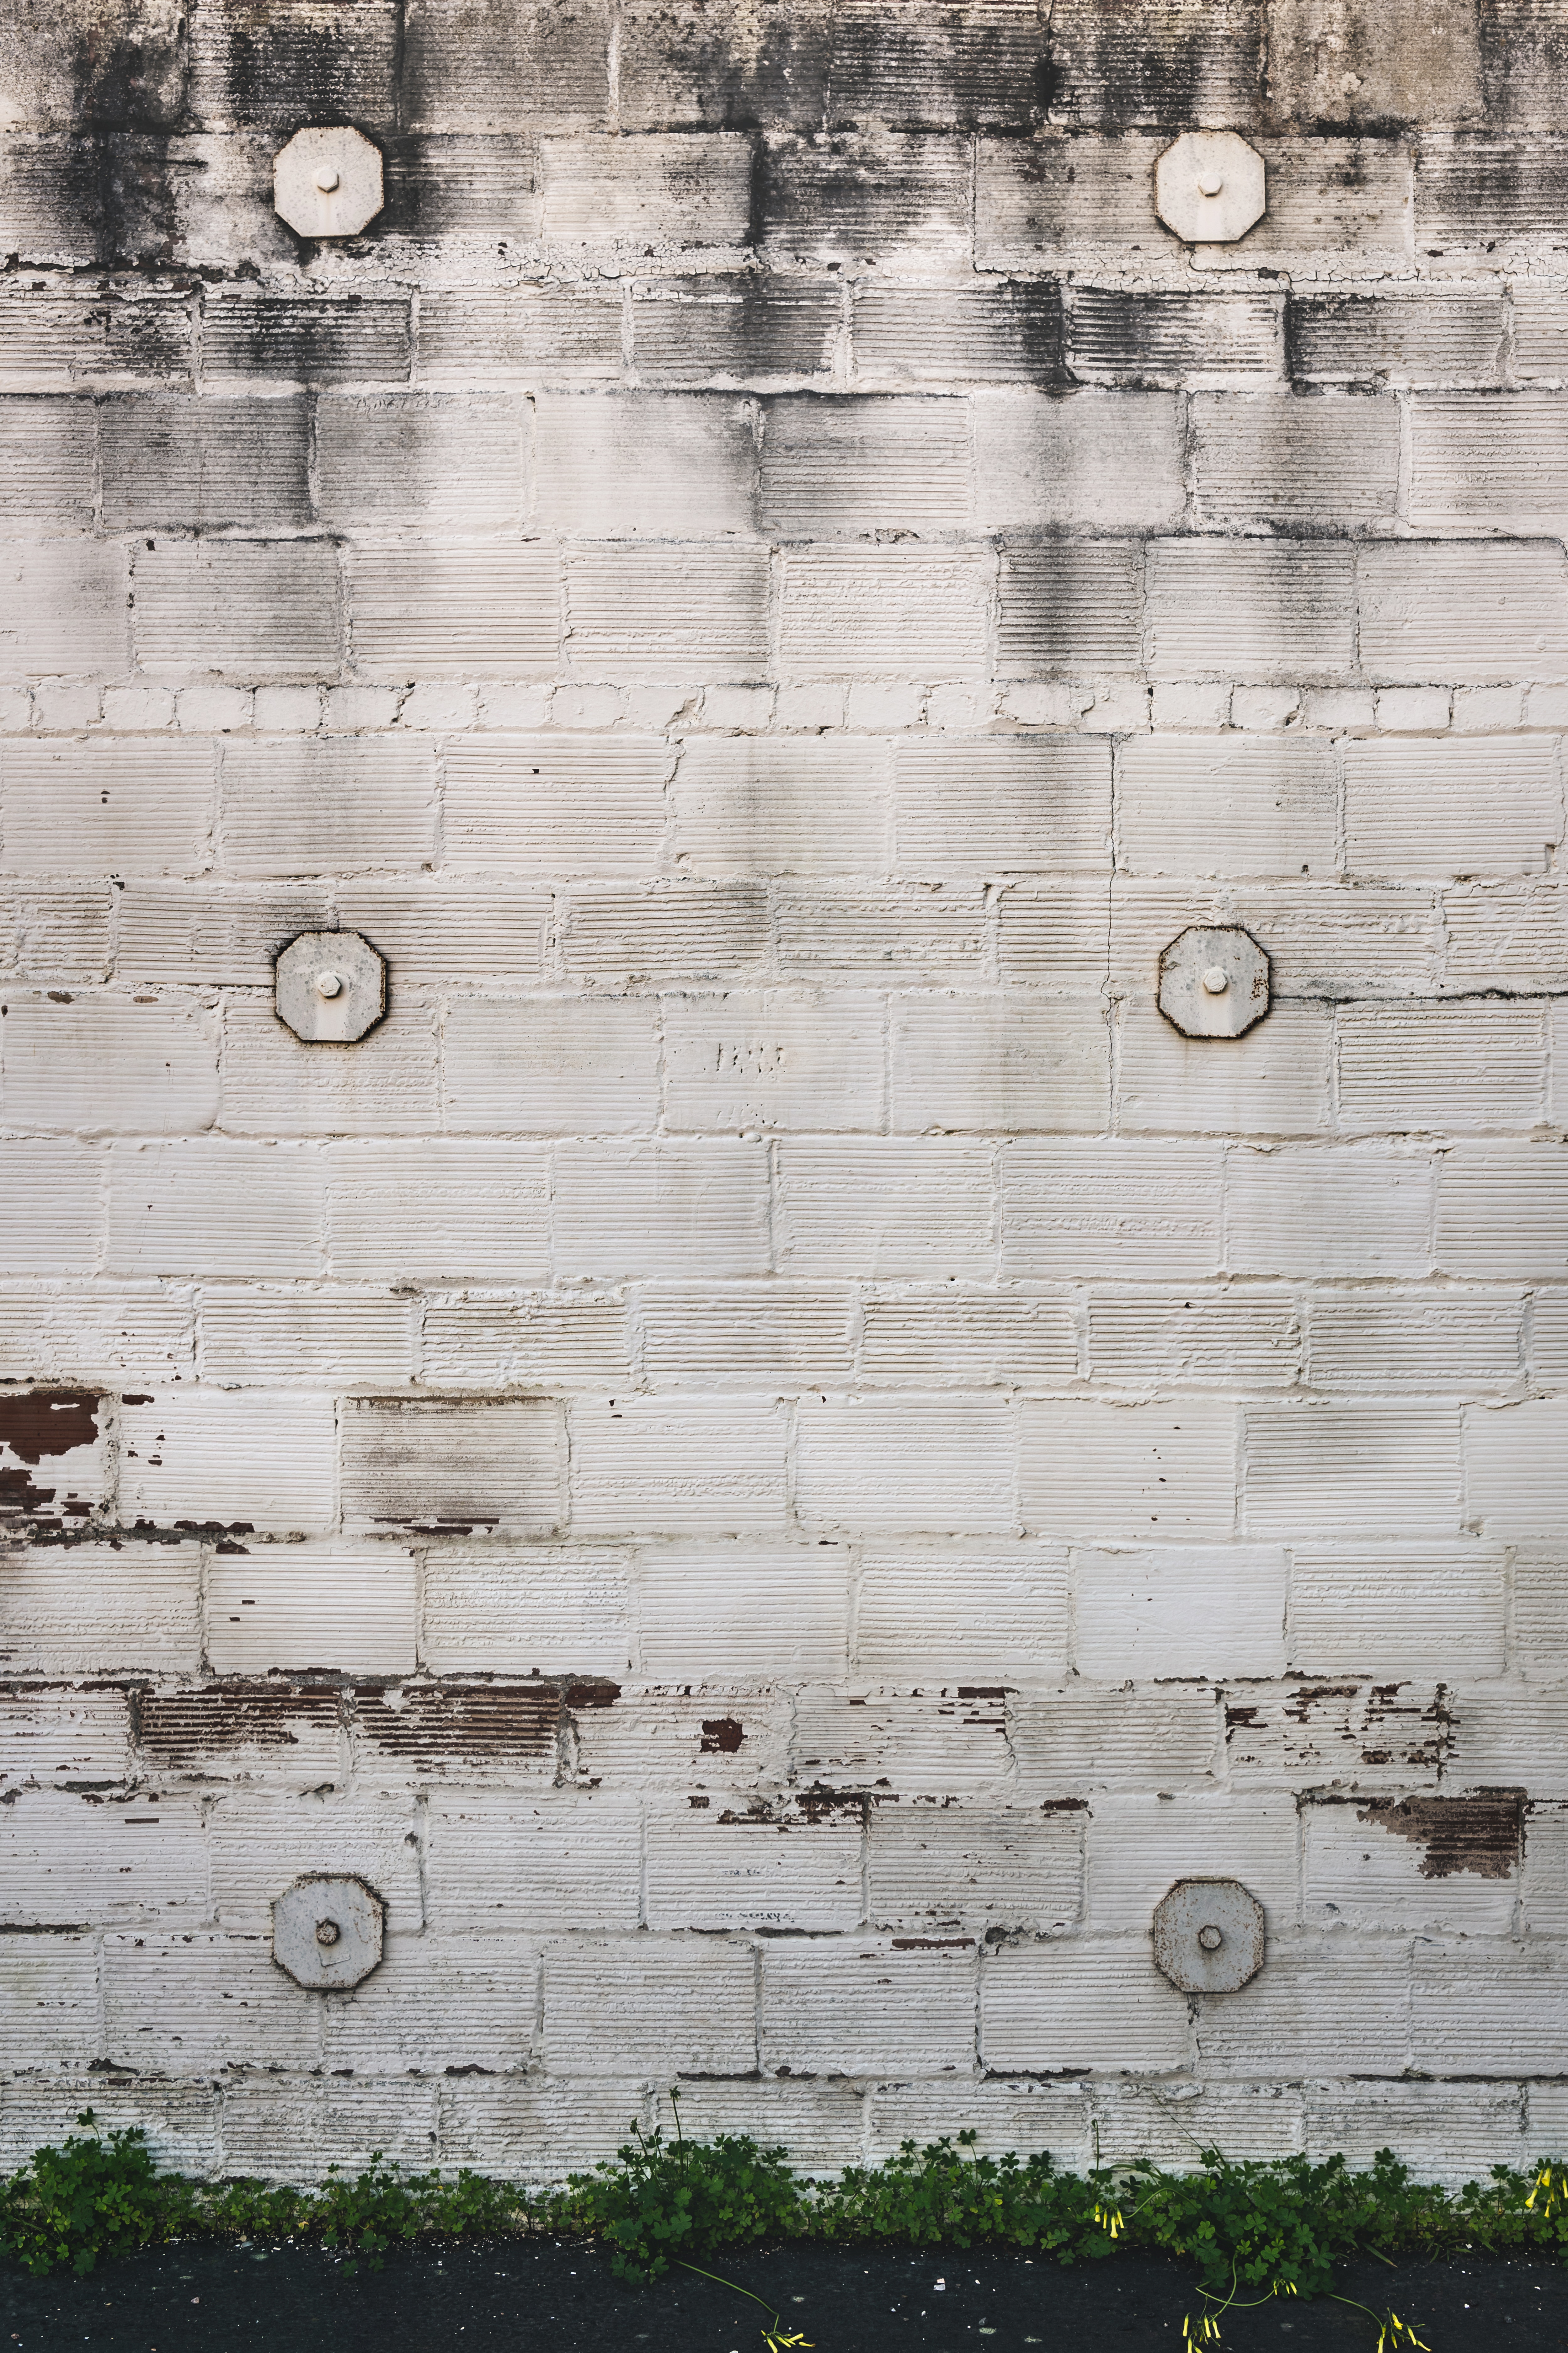 Free Images spots, stains, wall, textures Brick